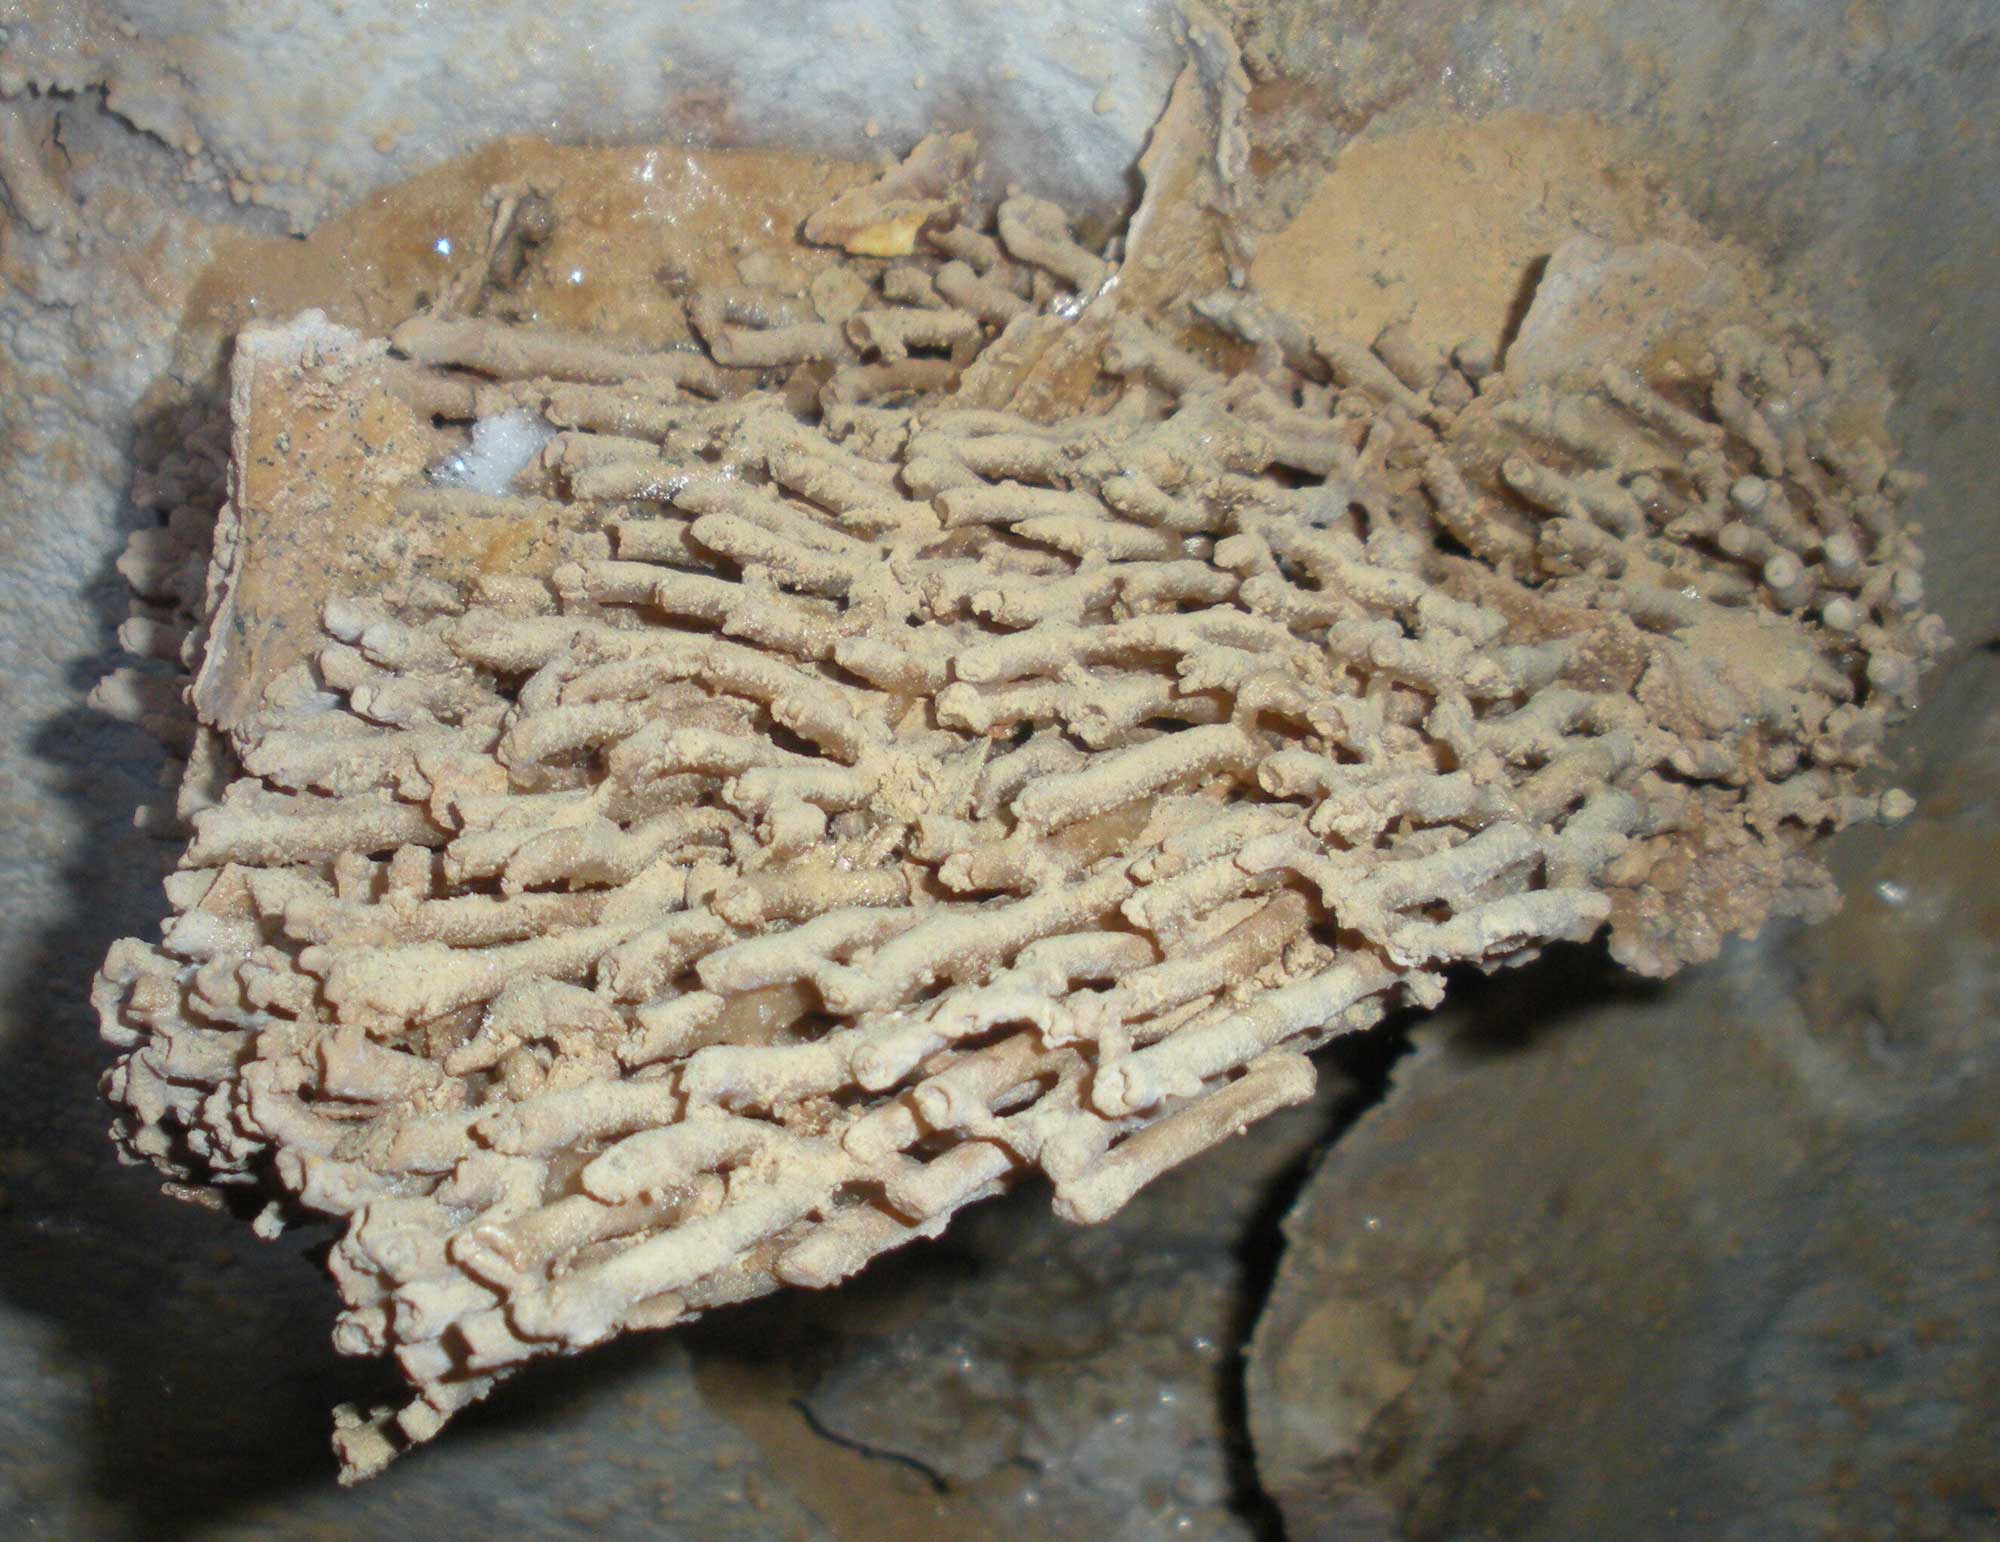 Photograph of Mississippian Pahasapa Limestone in Wind Cave with a colonial coral specimen exposed on its surface. The coral appears to be made up of a group of elongated columns or tubes. The specimen is oriented horizontally in the image.